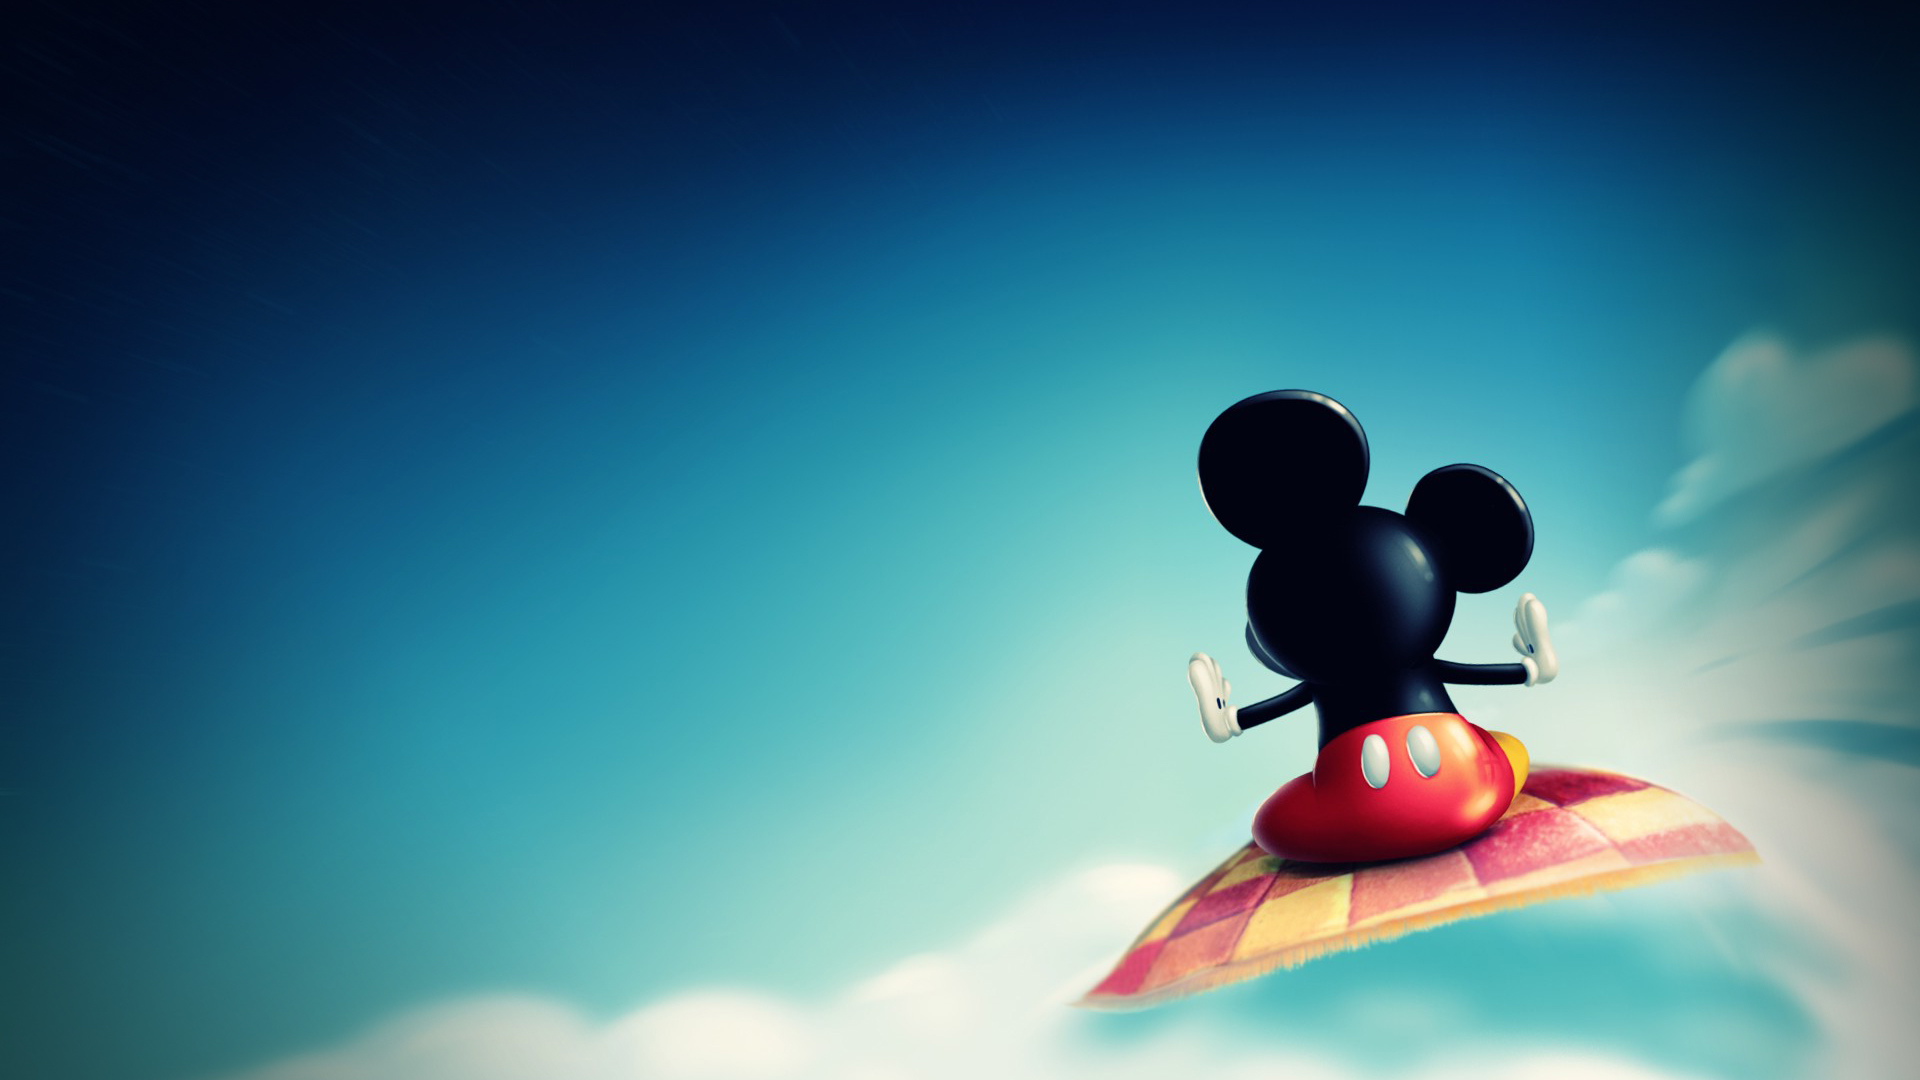 mickey mouse wallpaper Full HD 1080p download